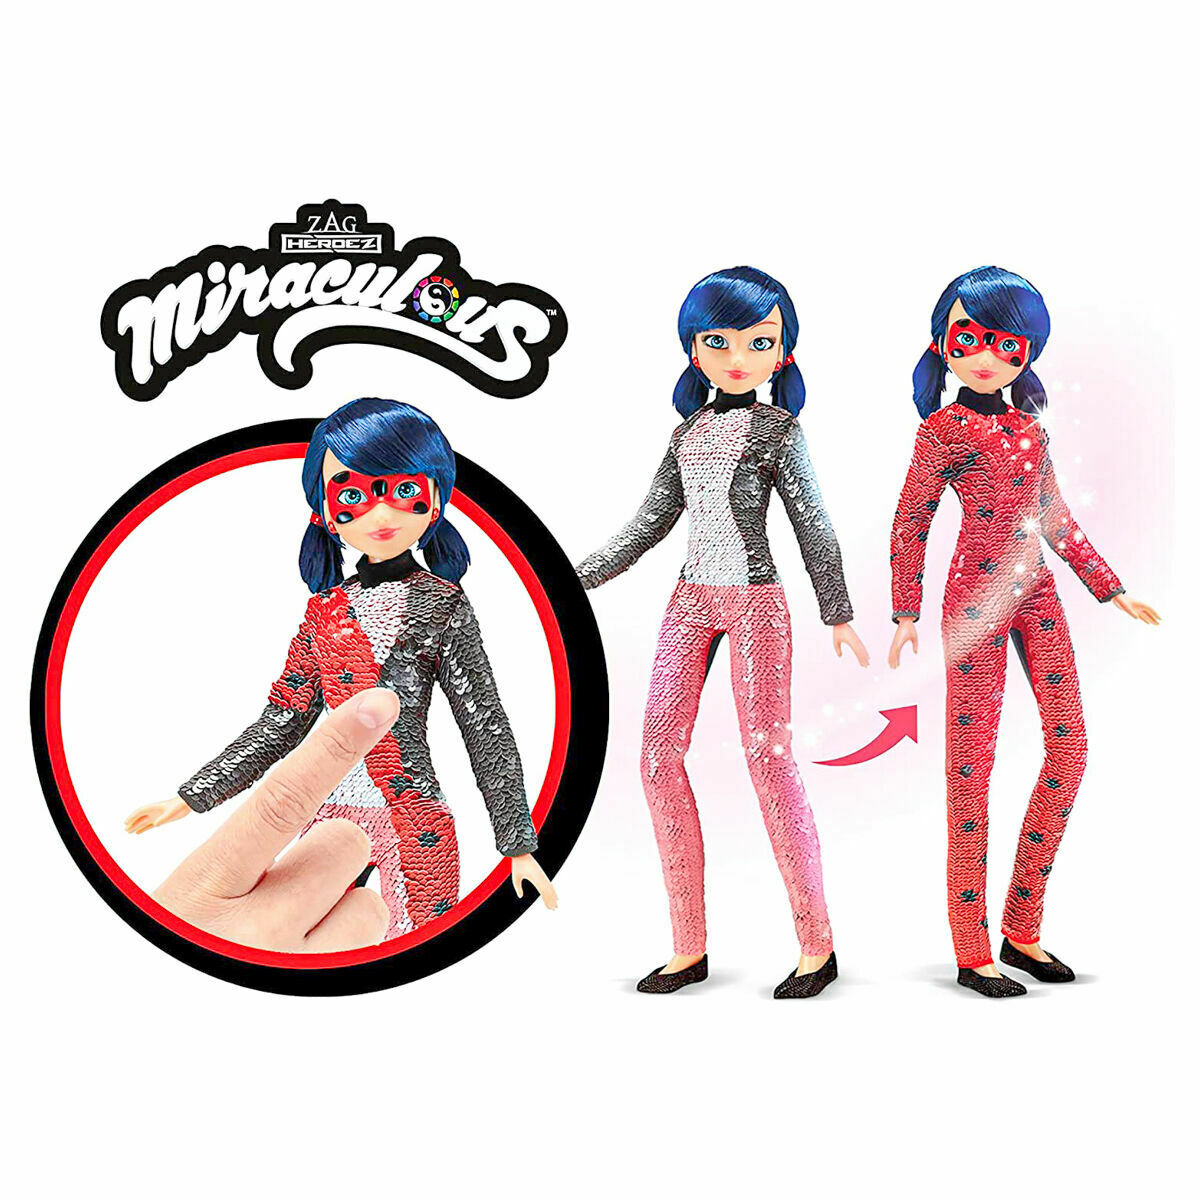 Miraculous Marinette to Ladybug Sequins Doll